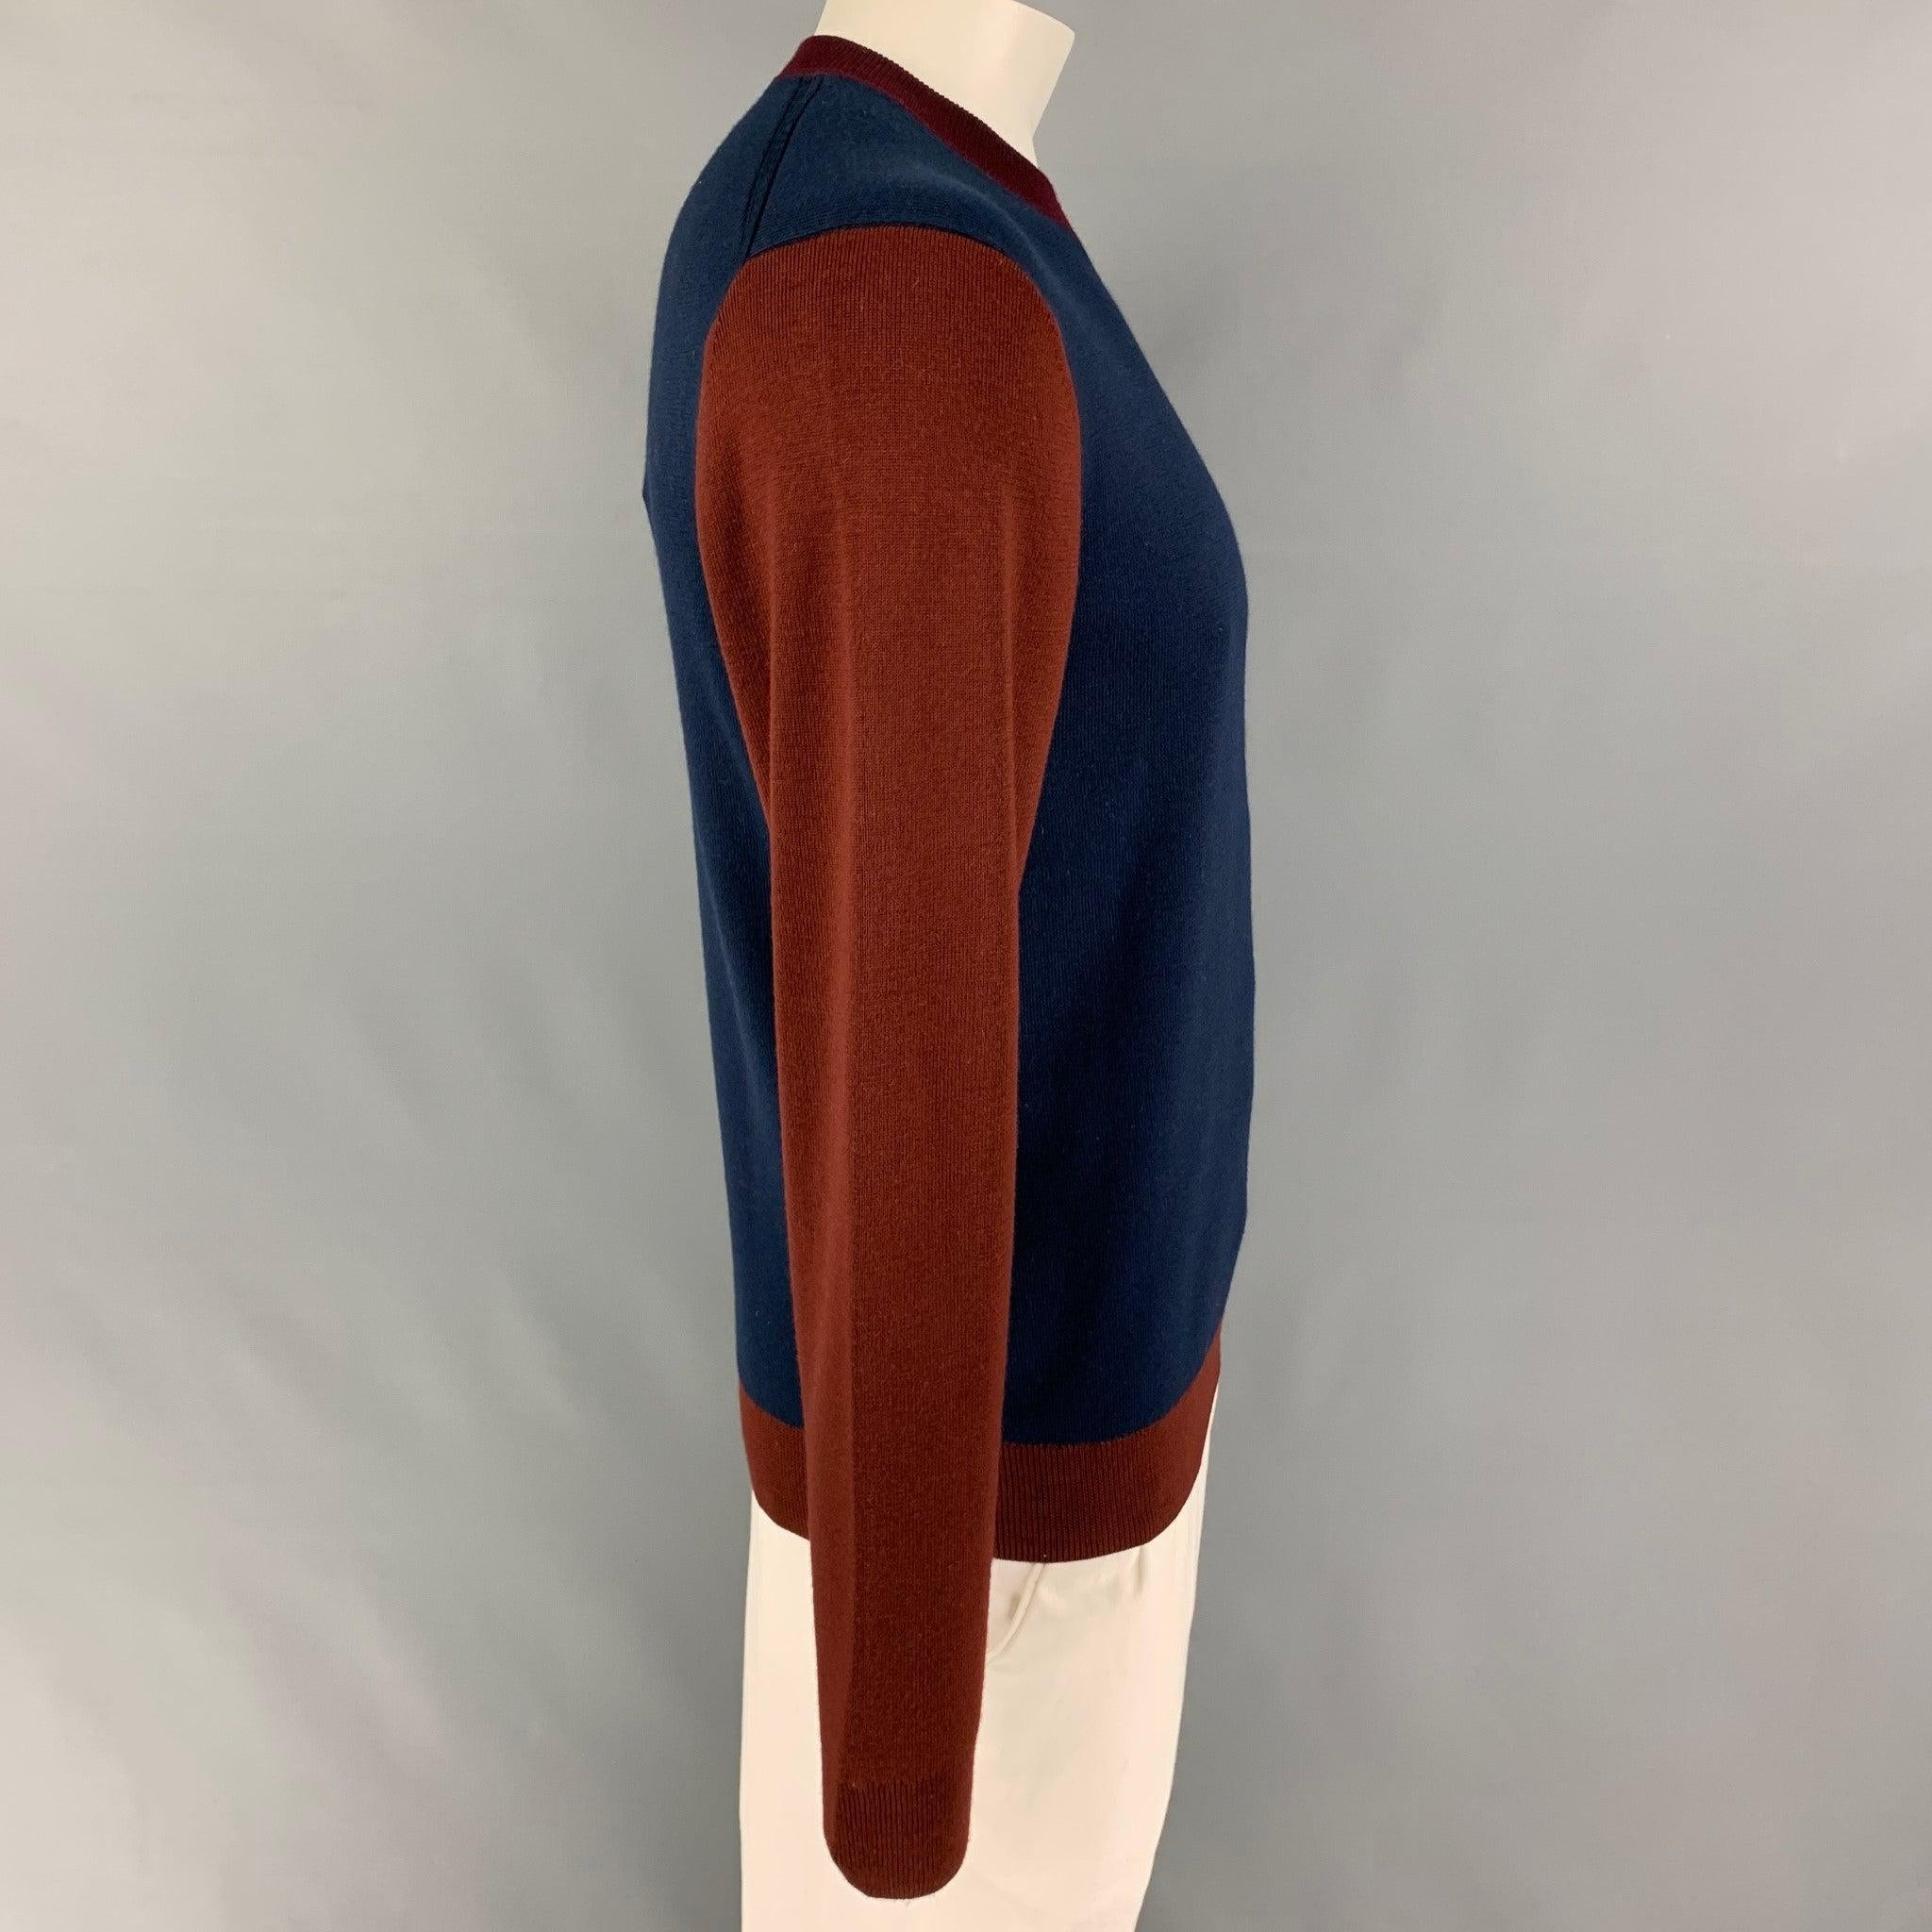 PAUL SMITH sweater comes in a navy & burgundy color block merino wool featuring a crew-neck.
Very Good
Pre-Owned Condition. 

Marked:   L  

Measurements: 
 
Shoulder:
19 inches Chest: 42 inches Sleeve: 27 inches Length: 26.5 inches 
  
  
